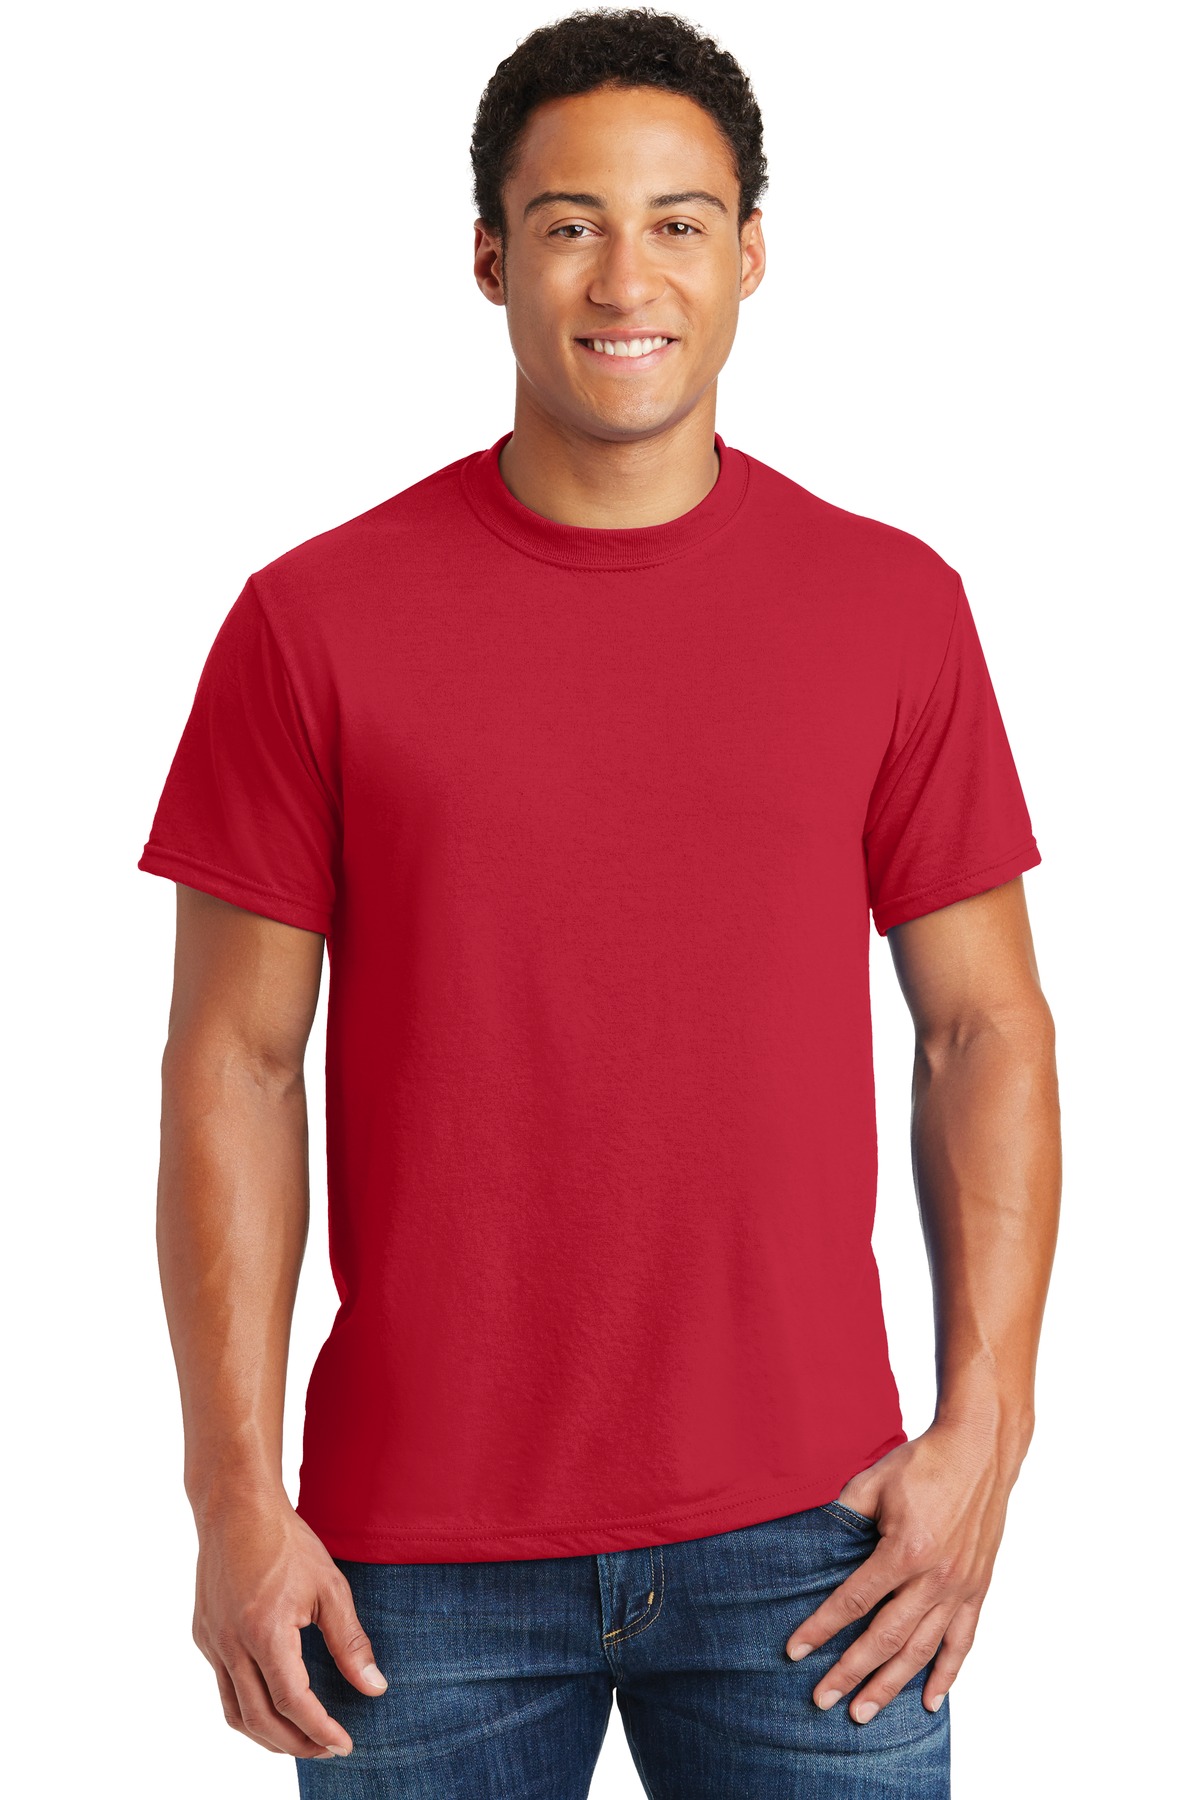 Jerzees T-Shirts for Corporate Hospitality ® Dri-Power® Sport 100% Polyester T-Shirt.-Jerzees